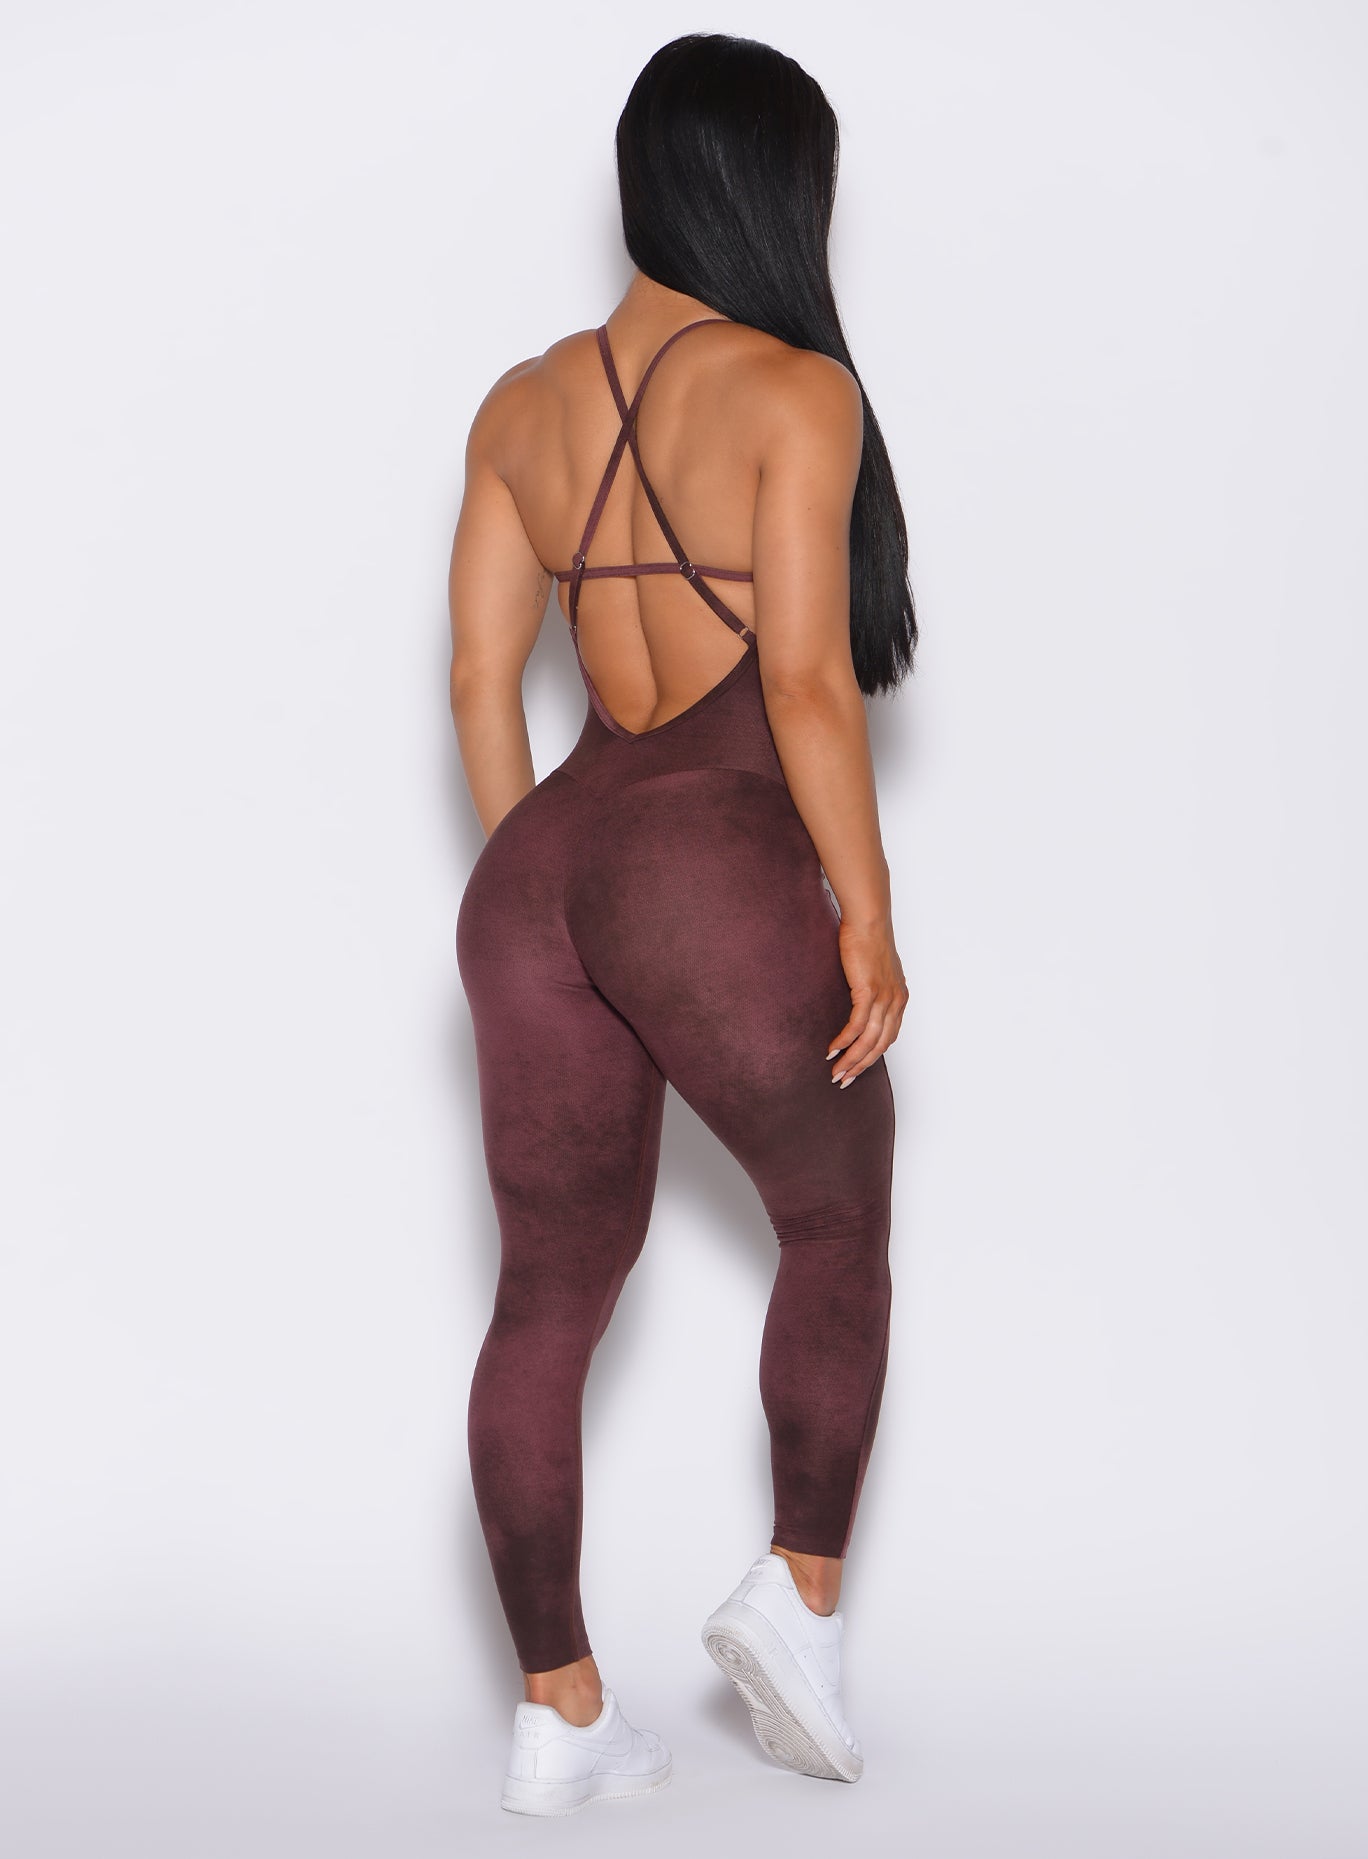 Back profile view of a model in our Sculpt Bodysuit in Vintage Port color along with the matching shape shrug